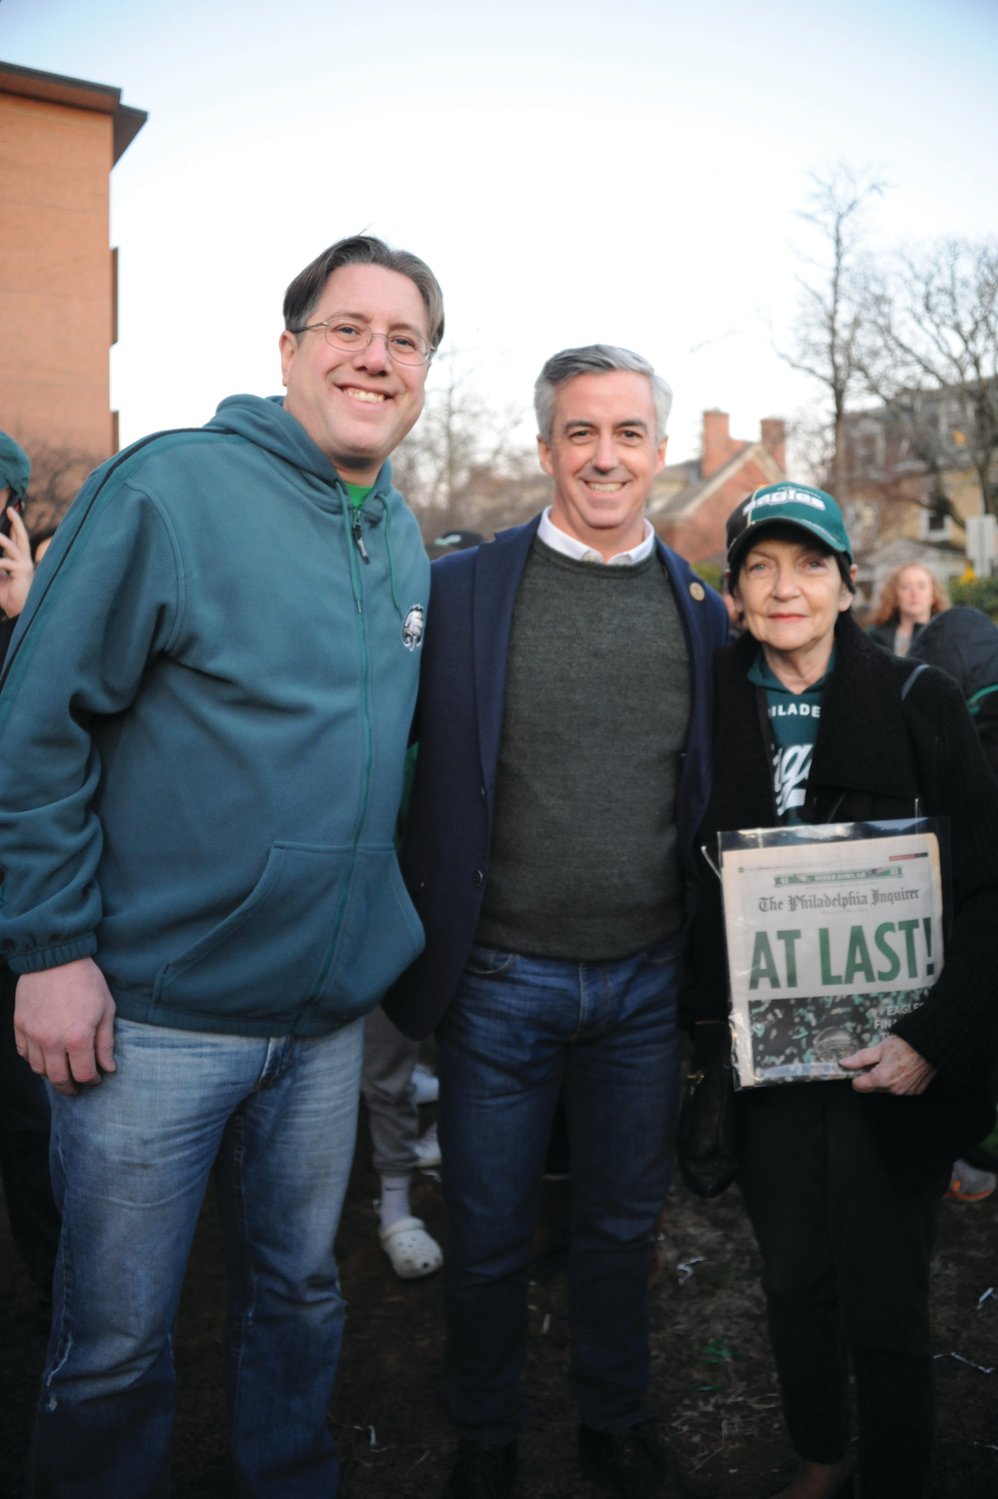 (From left) Bucks County State Rep. Tim Brennan, D-29, Bucks County Commissioner Bob Harvie and Doylestown mayor Noni West, pose for a photo during the Herald’s “Bucks County Loves the Birds” pep rally on the lawn of the old county courthouse in Doylestown.